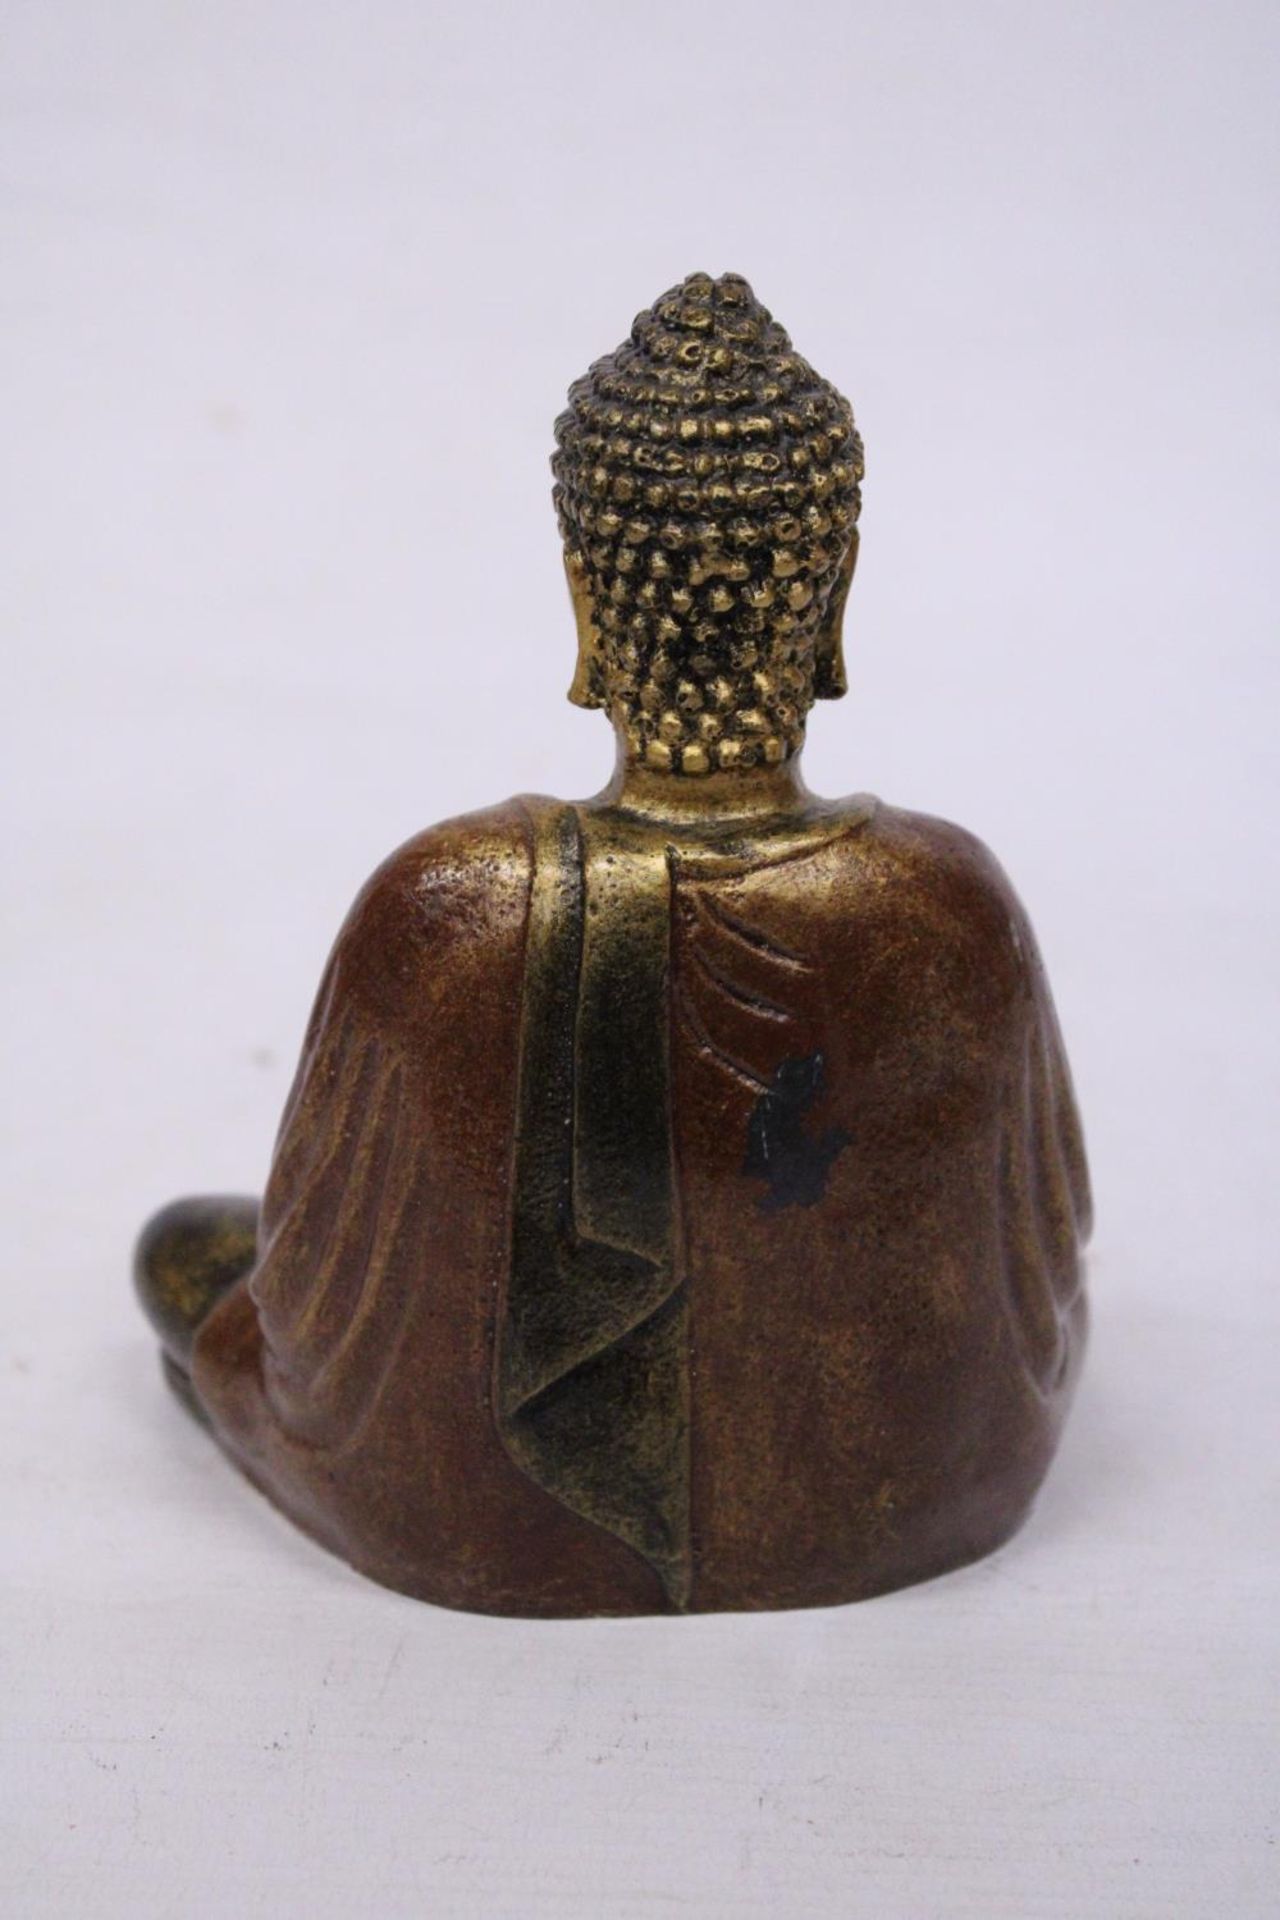 A SMALL RESIN GOLD COLOURED BUDDHA STATUE (16 CM) - Image 3 of 5